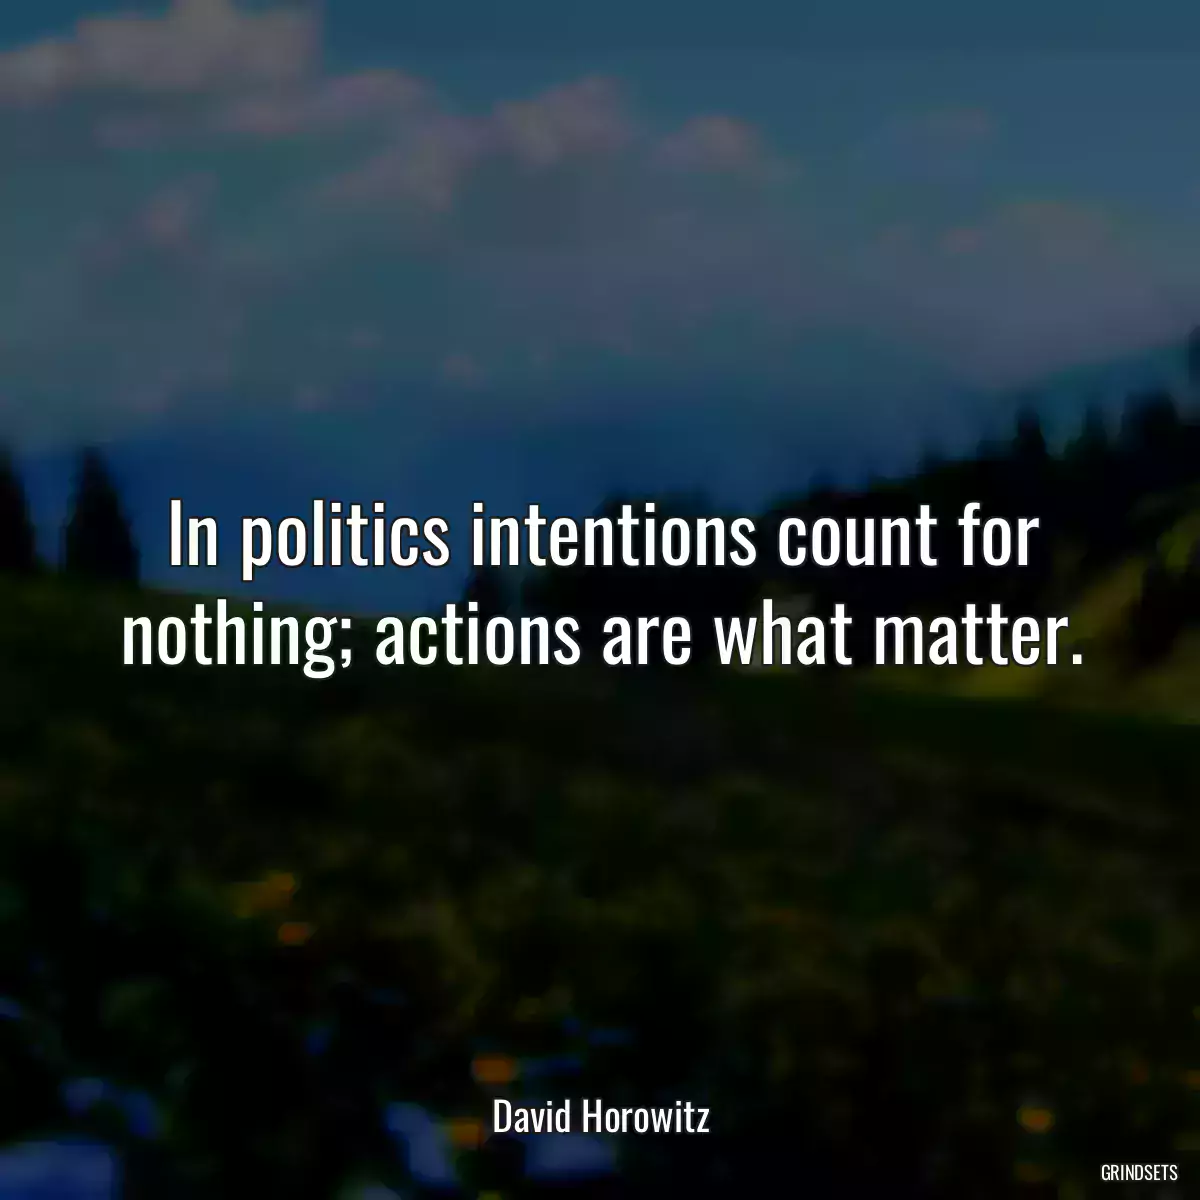 In politics intentions count for nothing; actions are what matter.